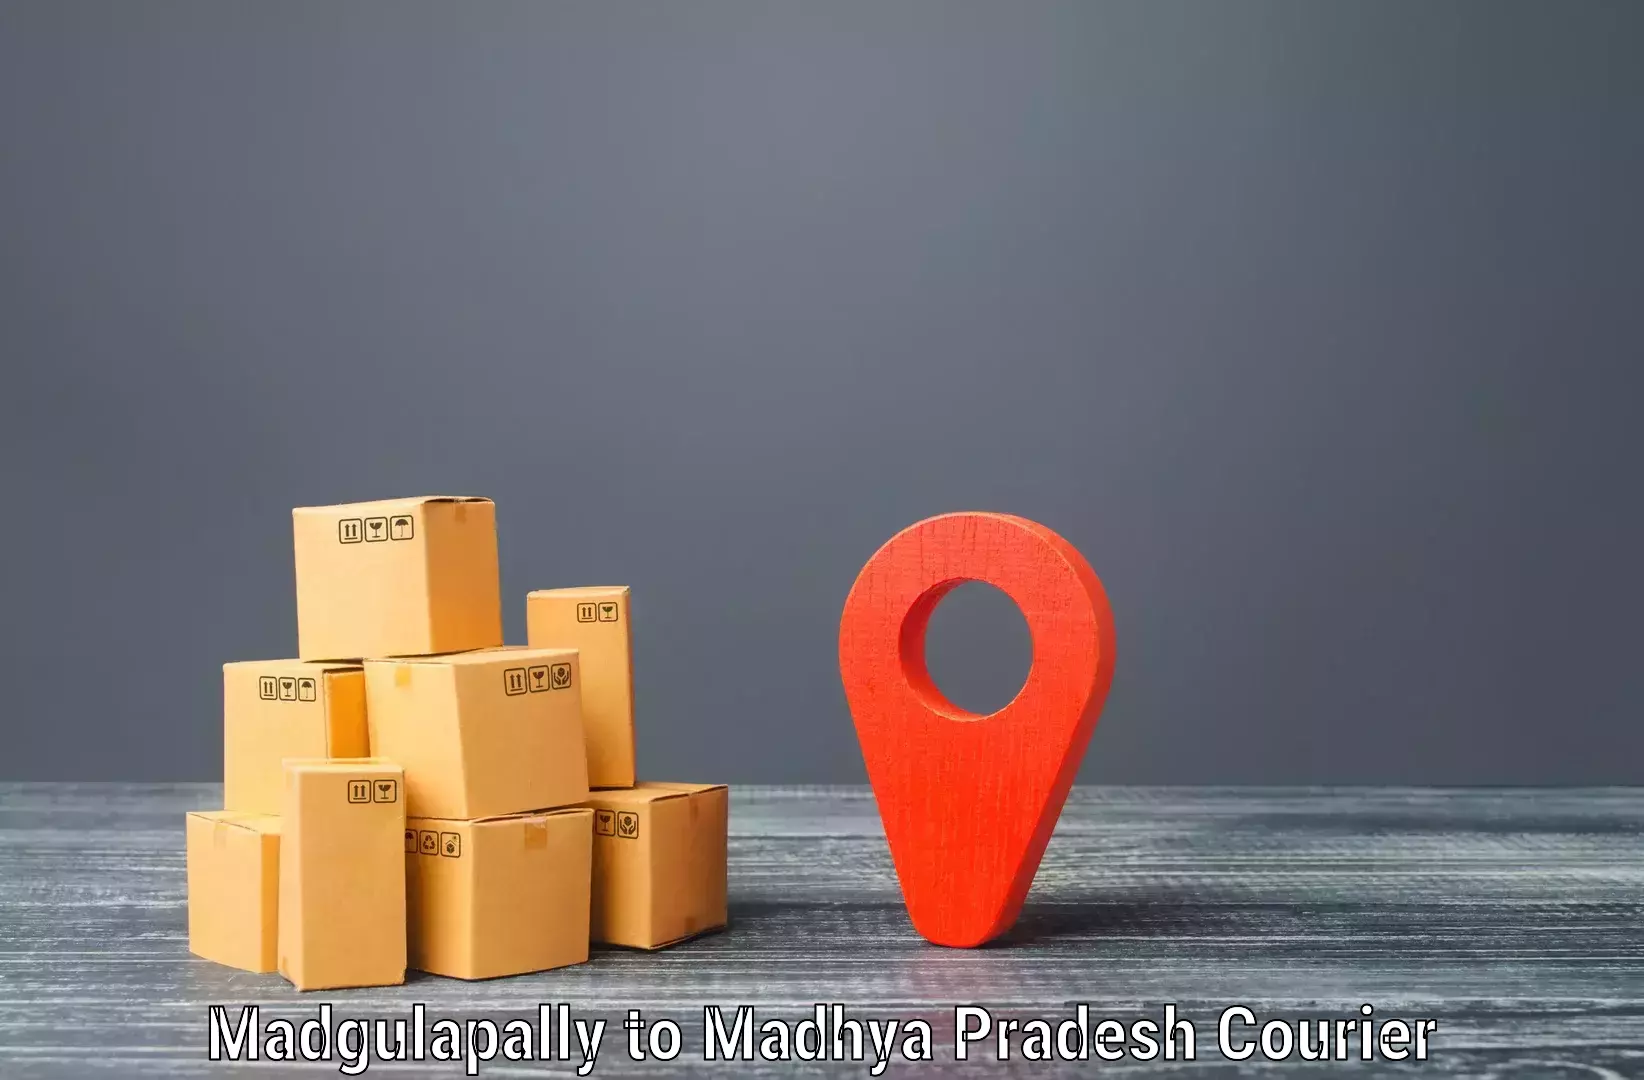 Courier service comparison Madgulapally to Chanderi